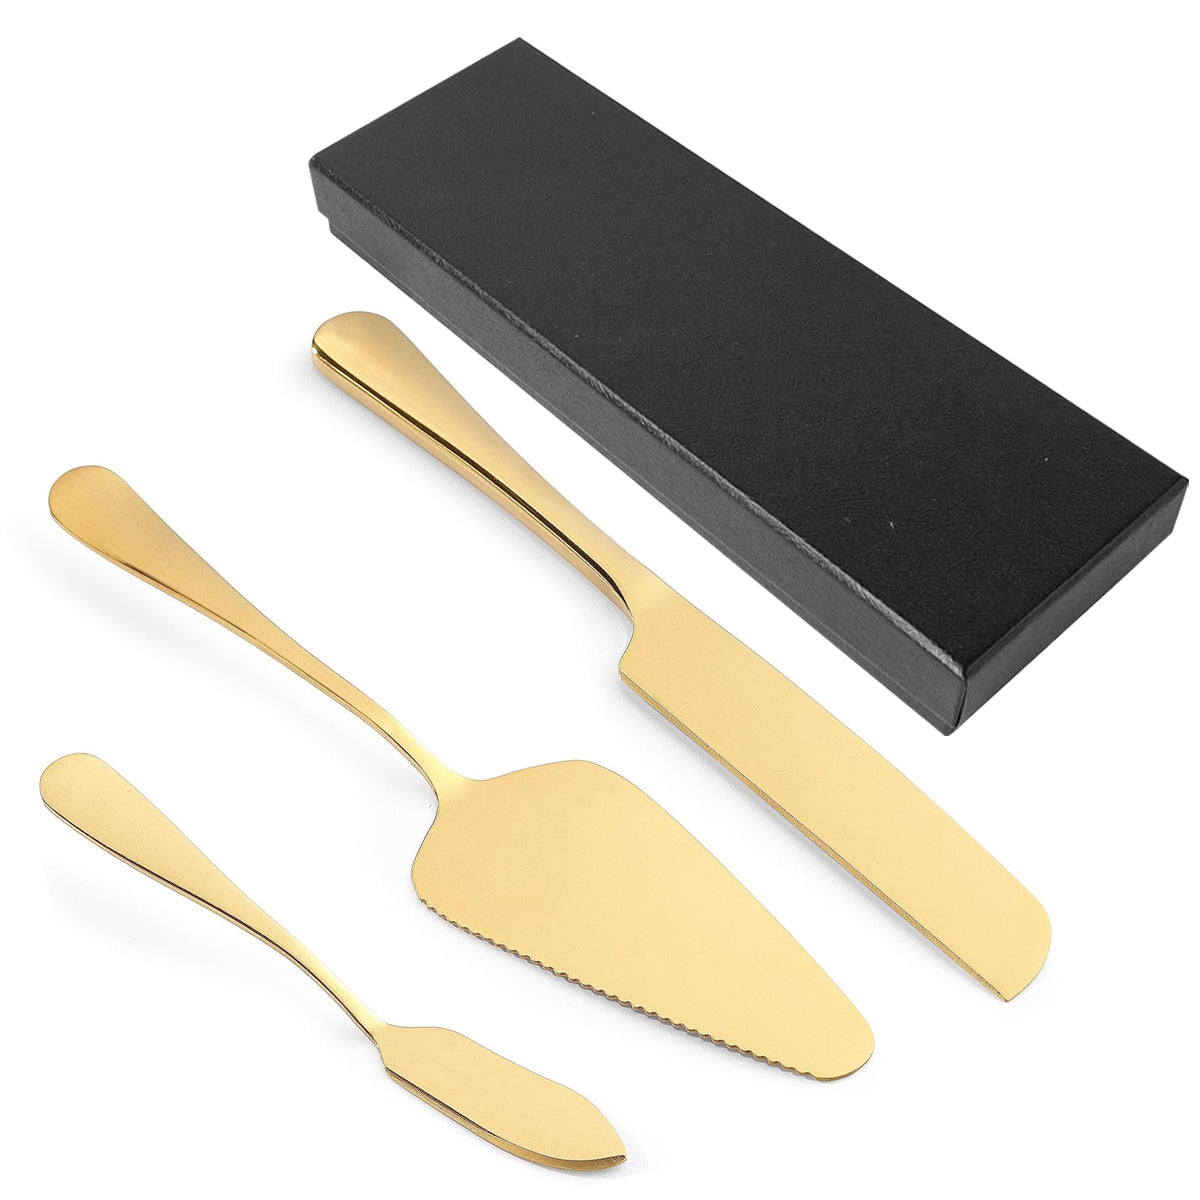 HASTHIP® Wedding Cake Knife and Server Set, 3PCS Cake Cutting Set for Wedding, Includes 9.29'' Cake Knife, 8.8'' Cake Server and 6.7" Cake Pie Spatula for Birthday Cake, Pizza, Pie, Party Supplies